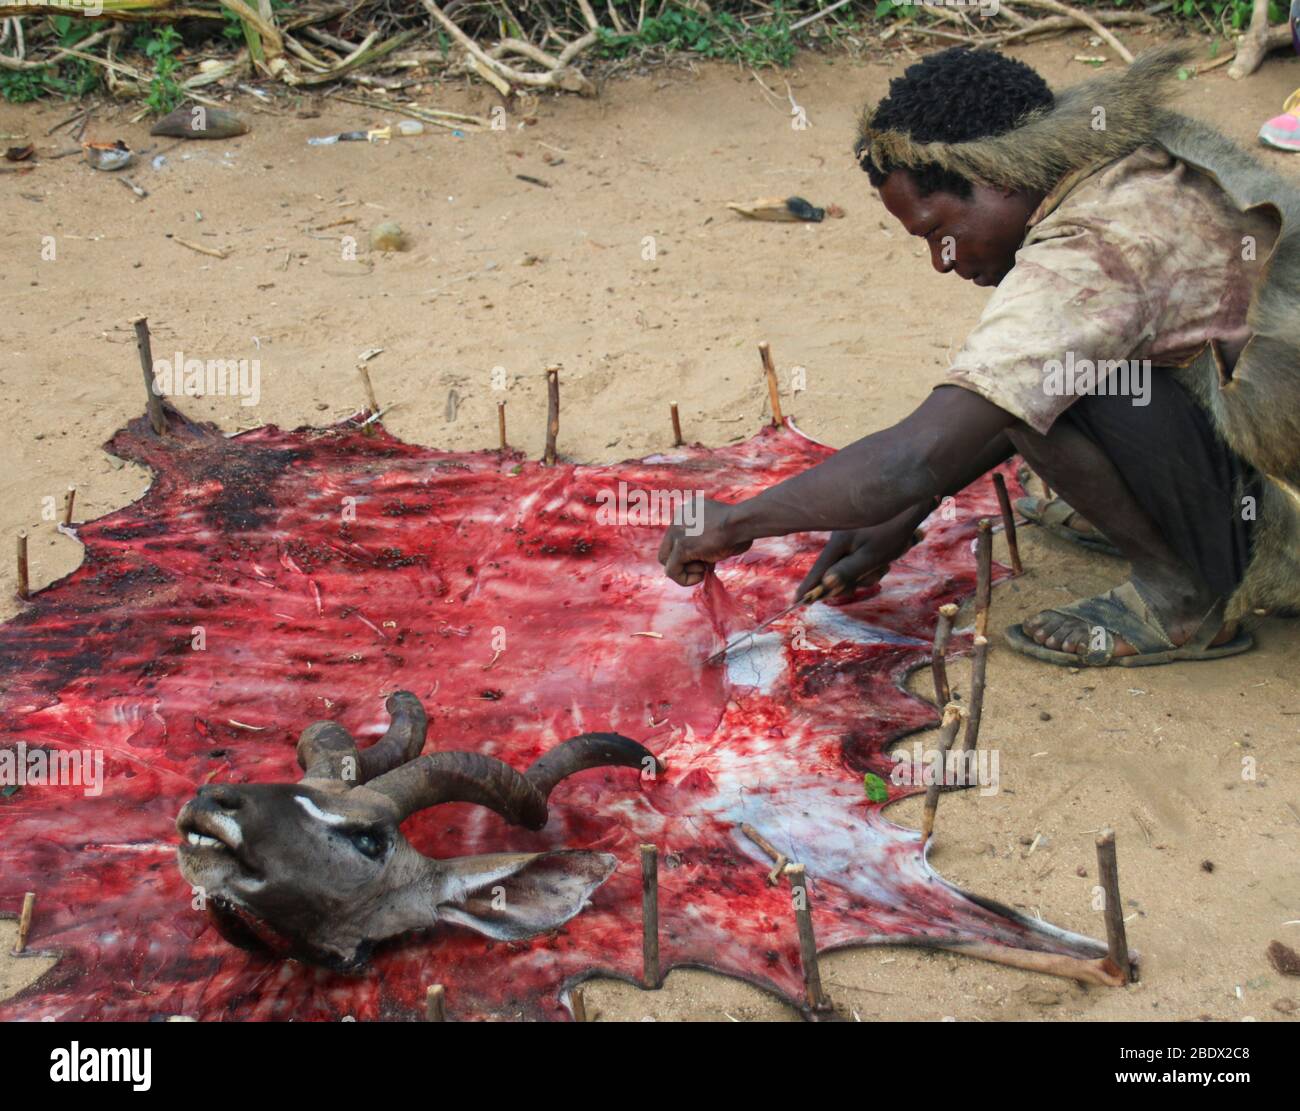 Hadzabe man curing leather from an antelope hide. Photographed at Lake Eyasi, Tanzania Stock Photo